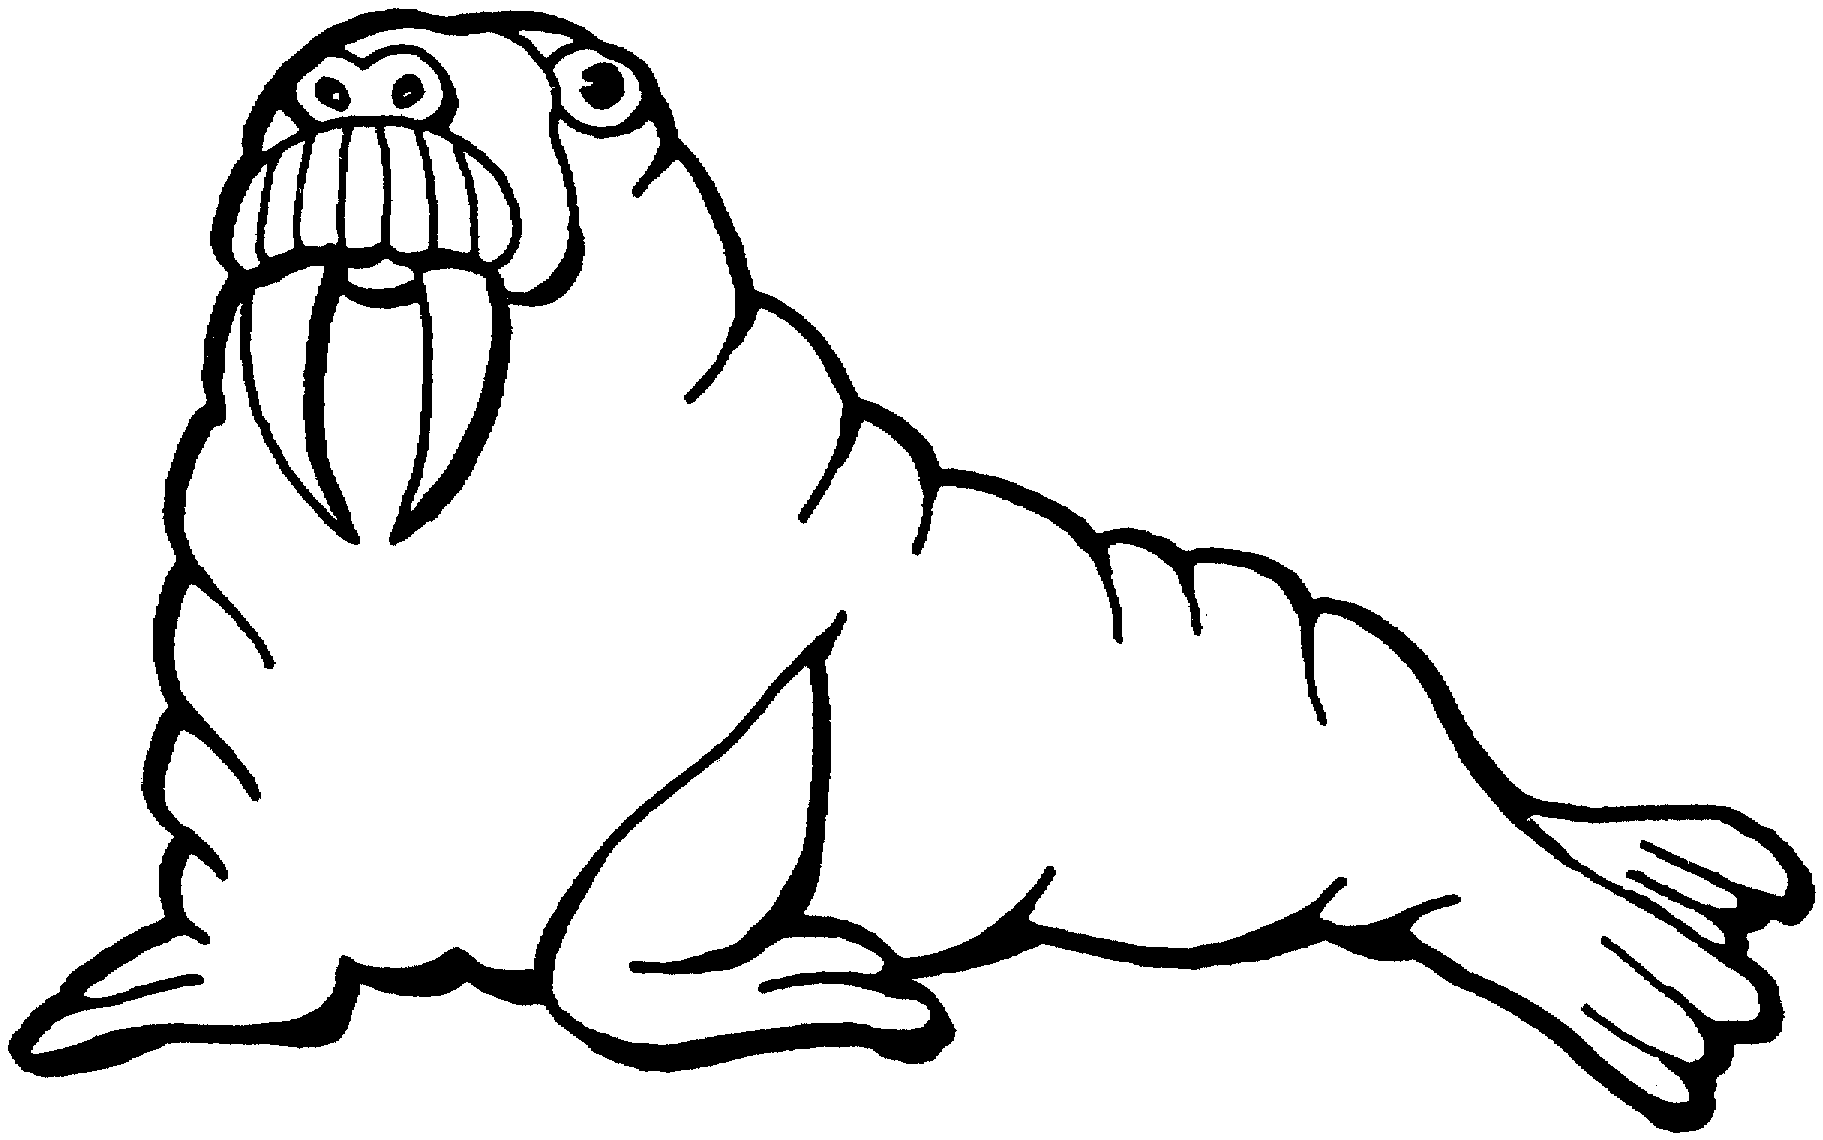 walrus colouring page free walrus coloring pages walrus colouring page 